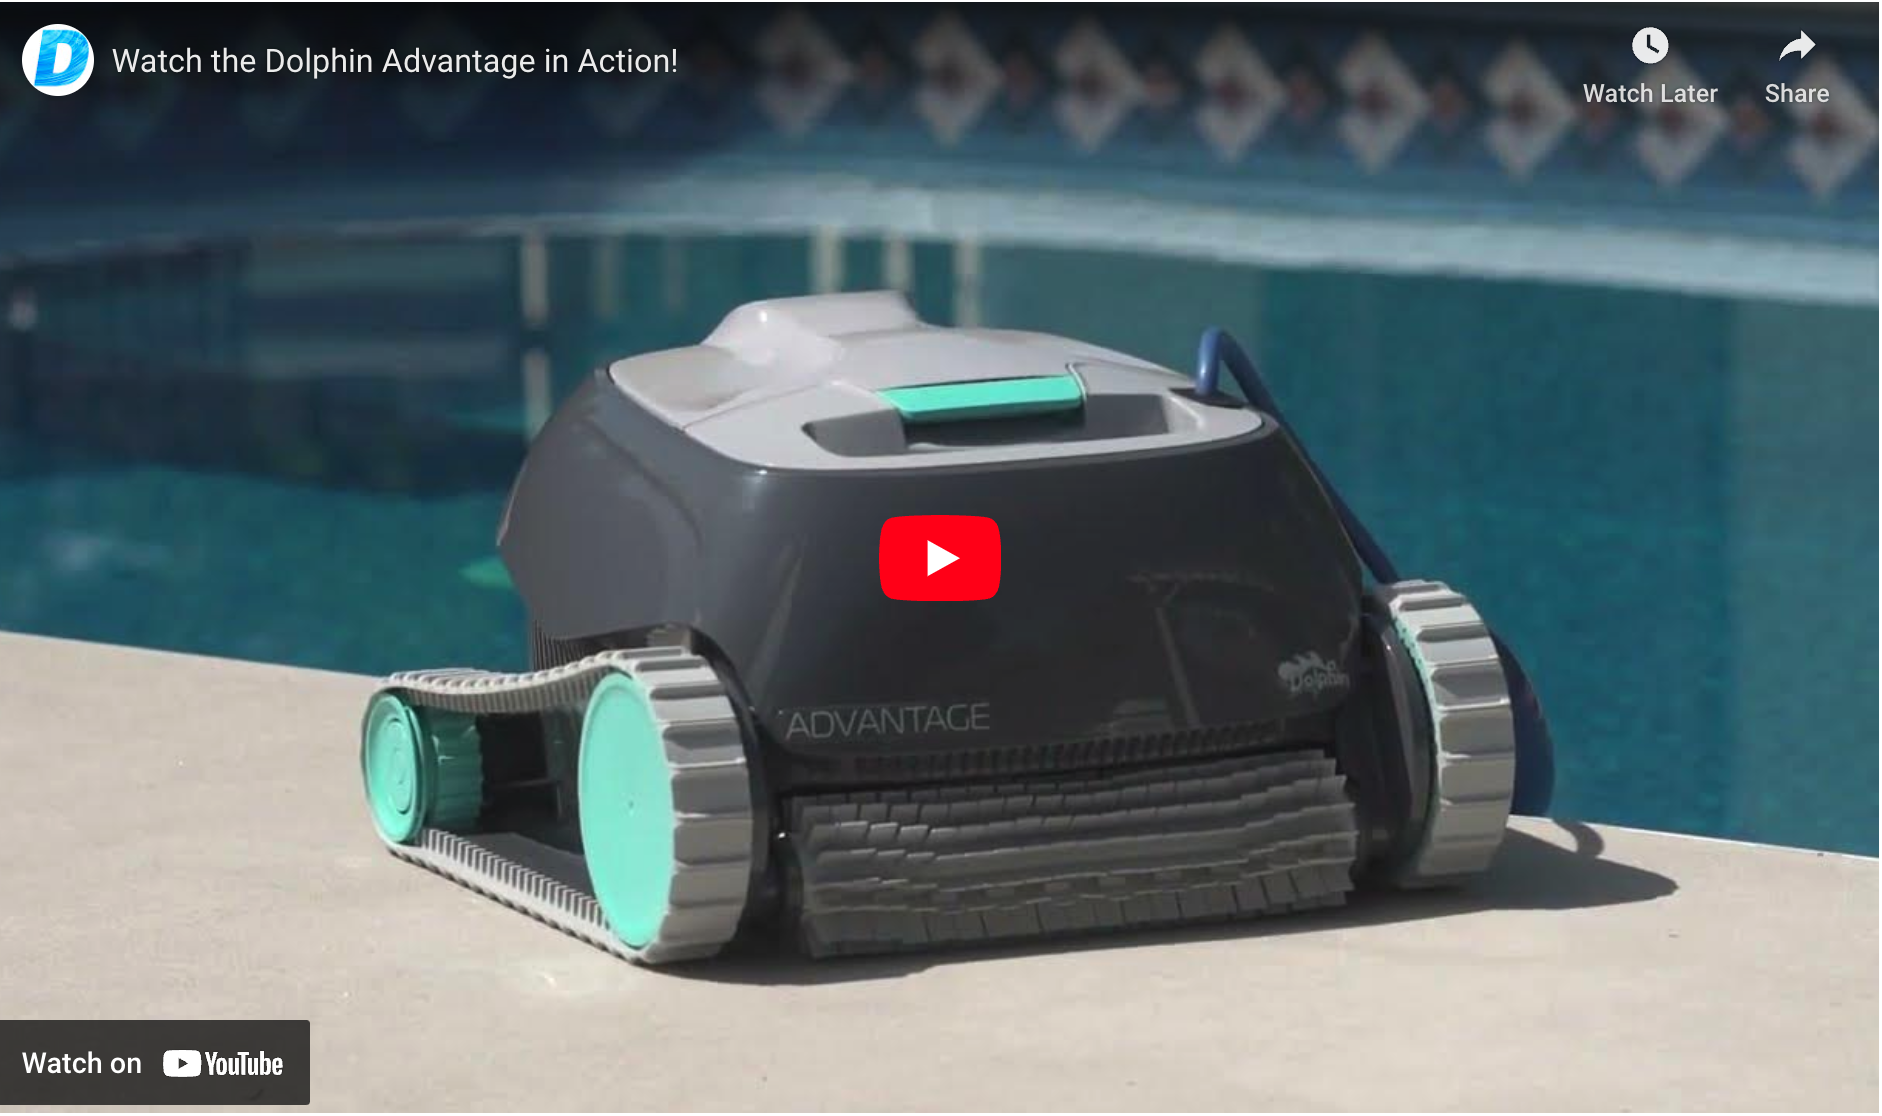 Dolphin Advantage Inground Robotic Cleaner in Action.